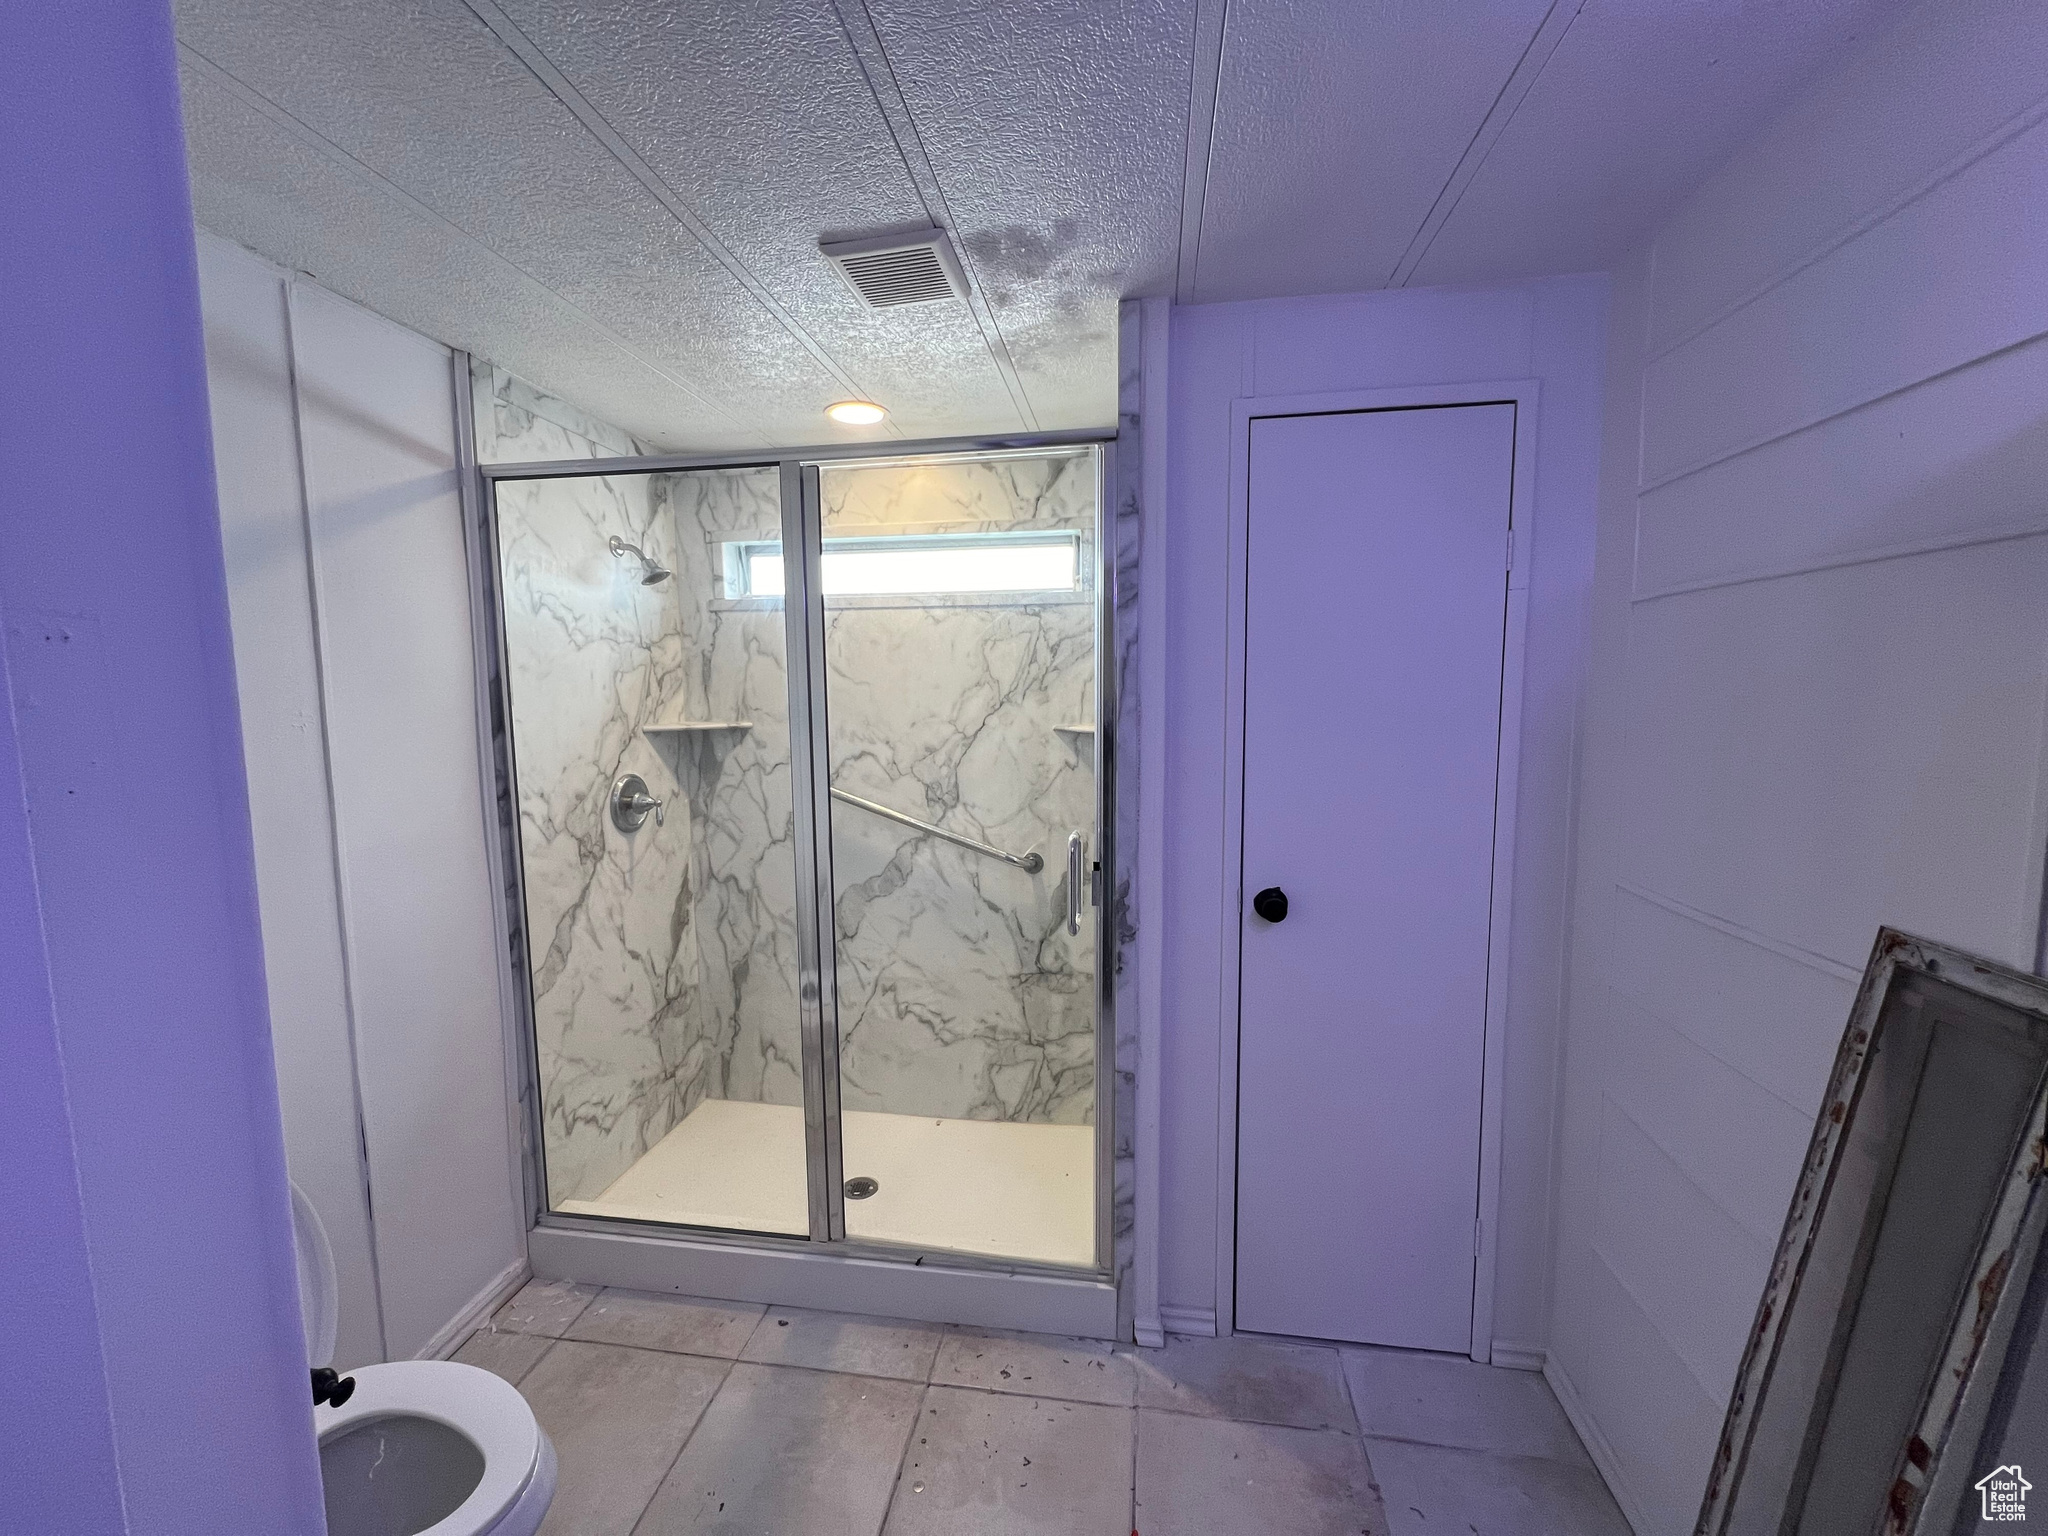 Bathroom with a shower with door, tile floors, a textured ceiling, and toilet